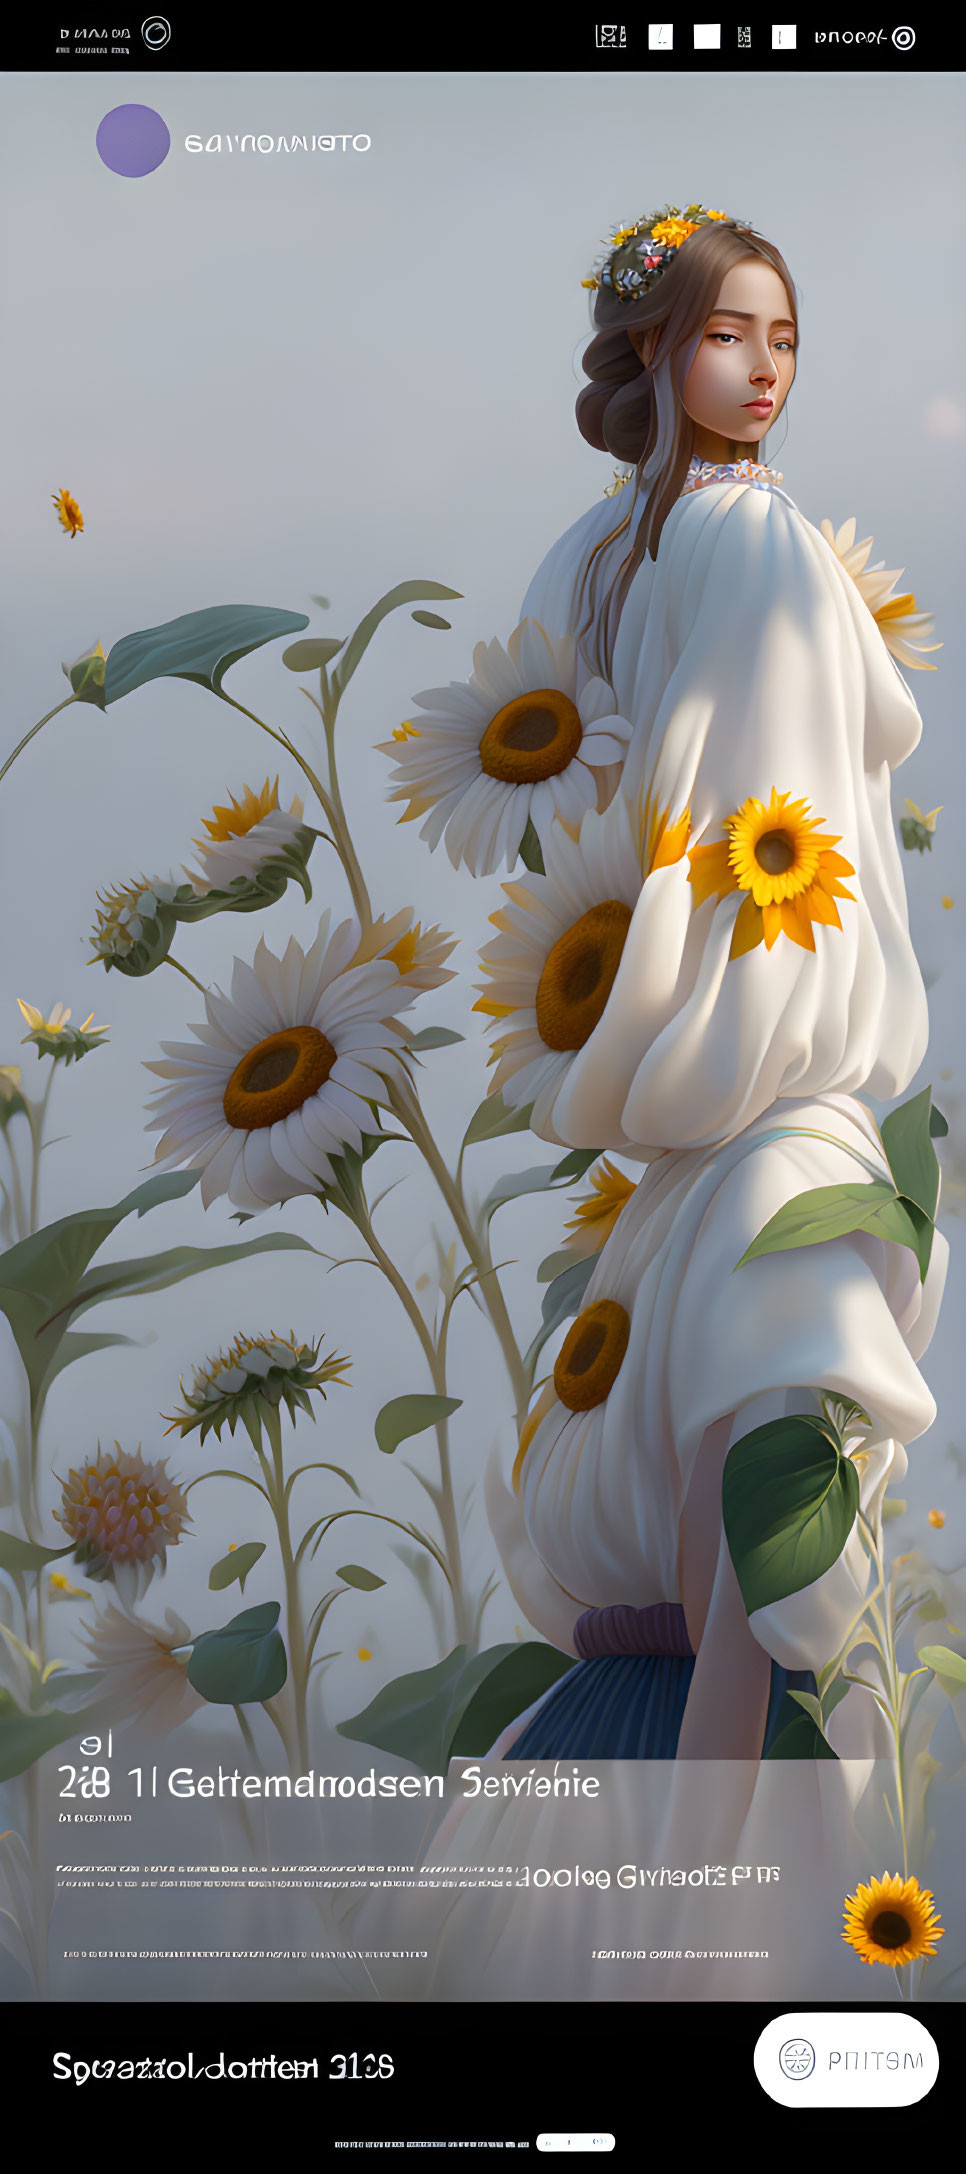 Digital Art: Serene Woman in White with Sunflowers in Sunny Floral Setting